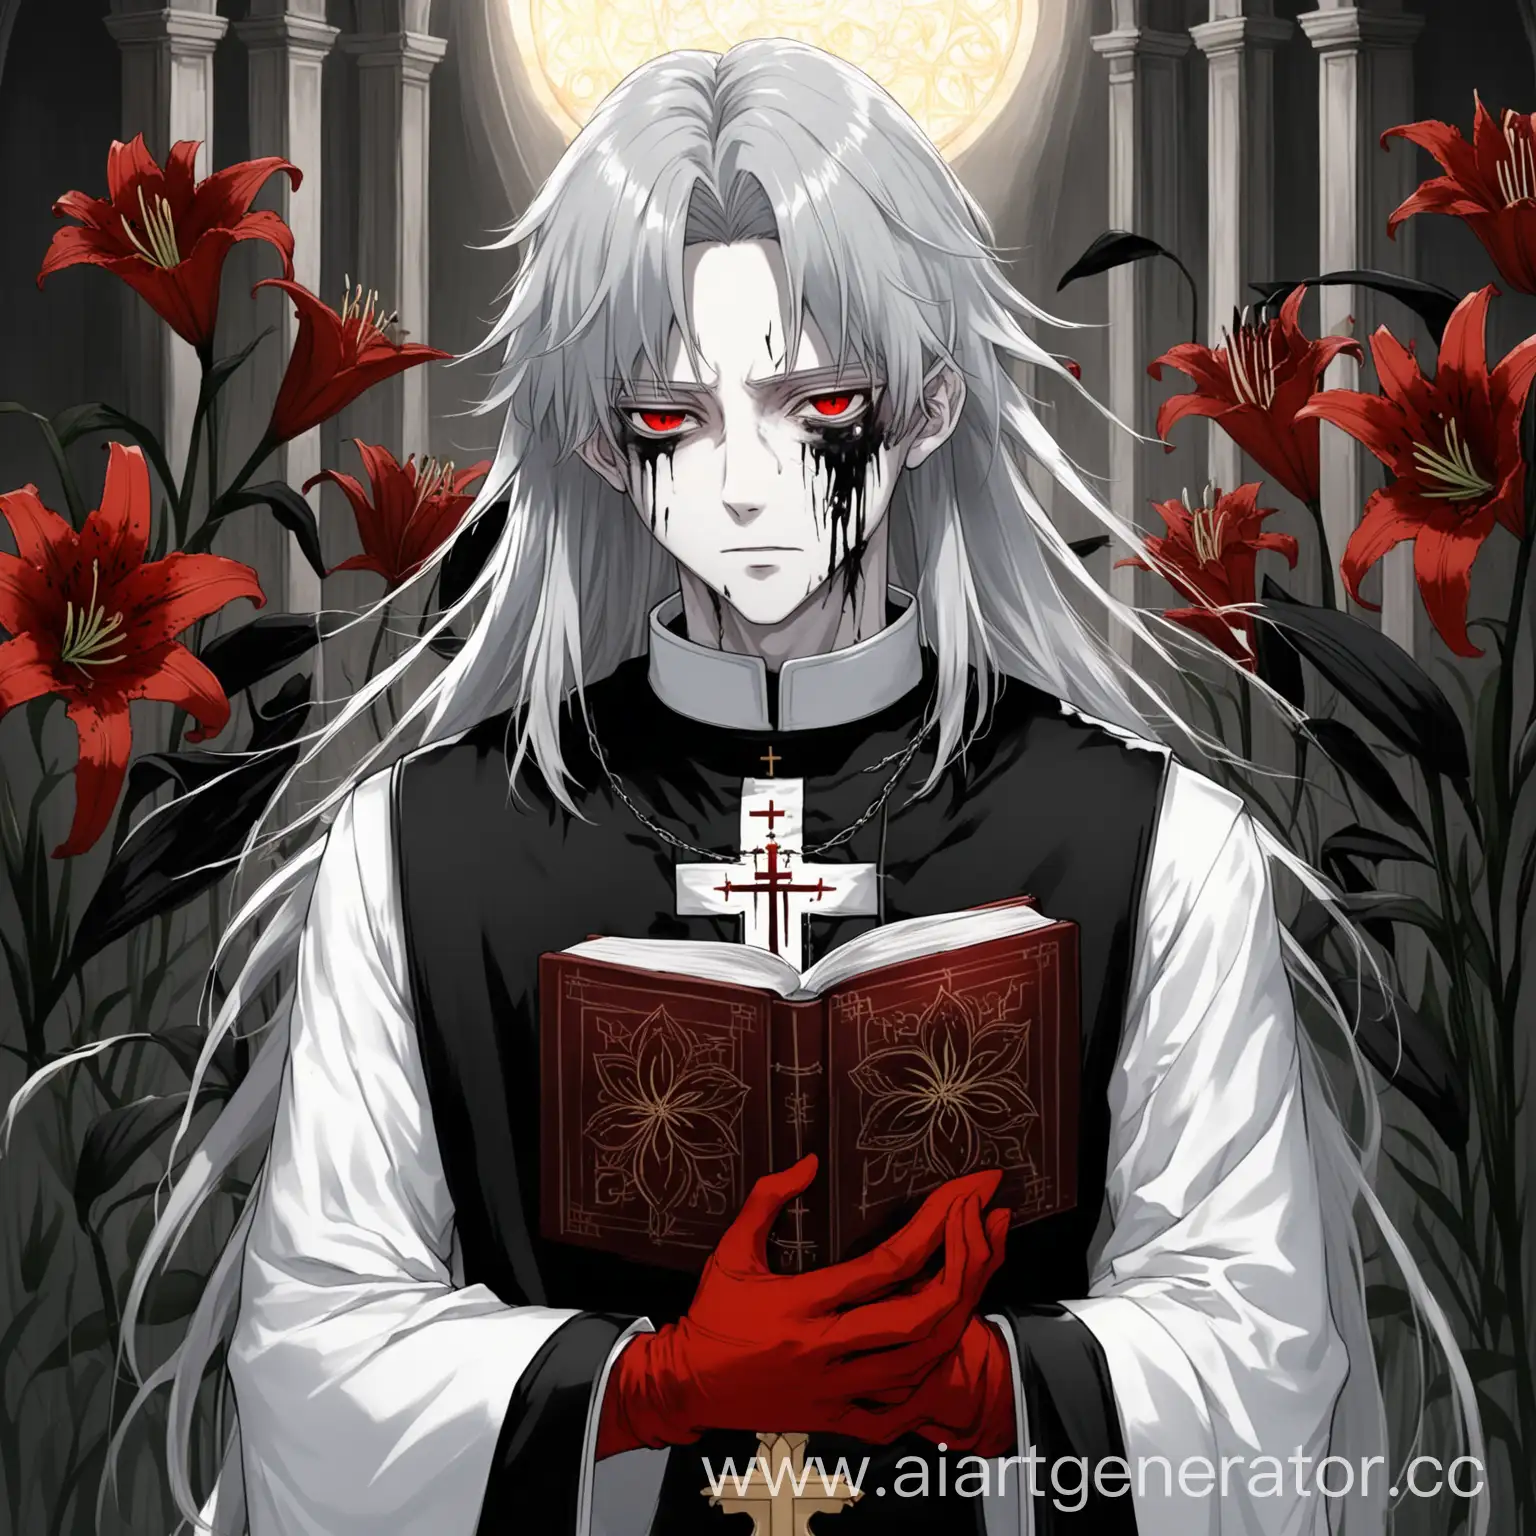 Mysterious-Anime-Priest-with-Gray-Hair-and-Red-Eyes-Holding-Sacred-Book